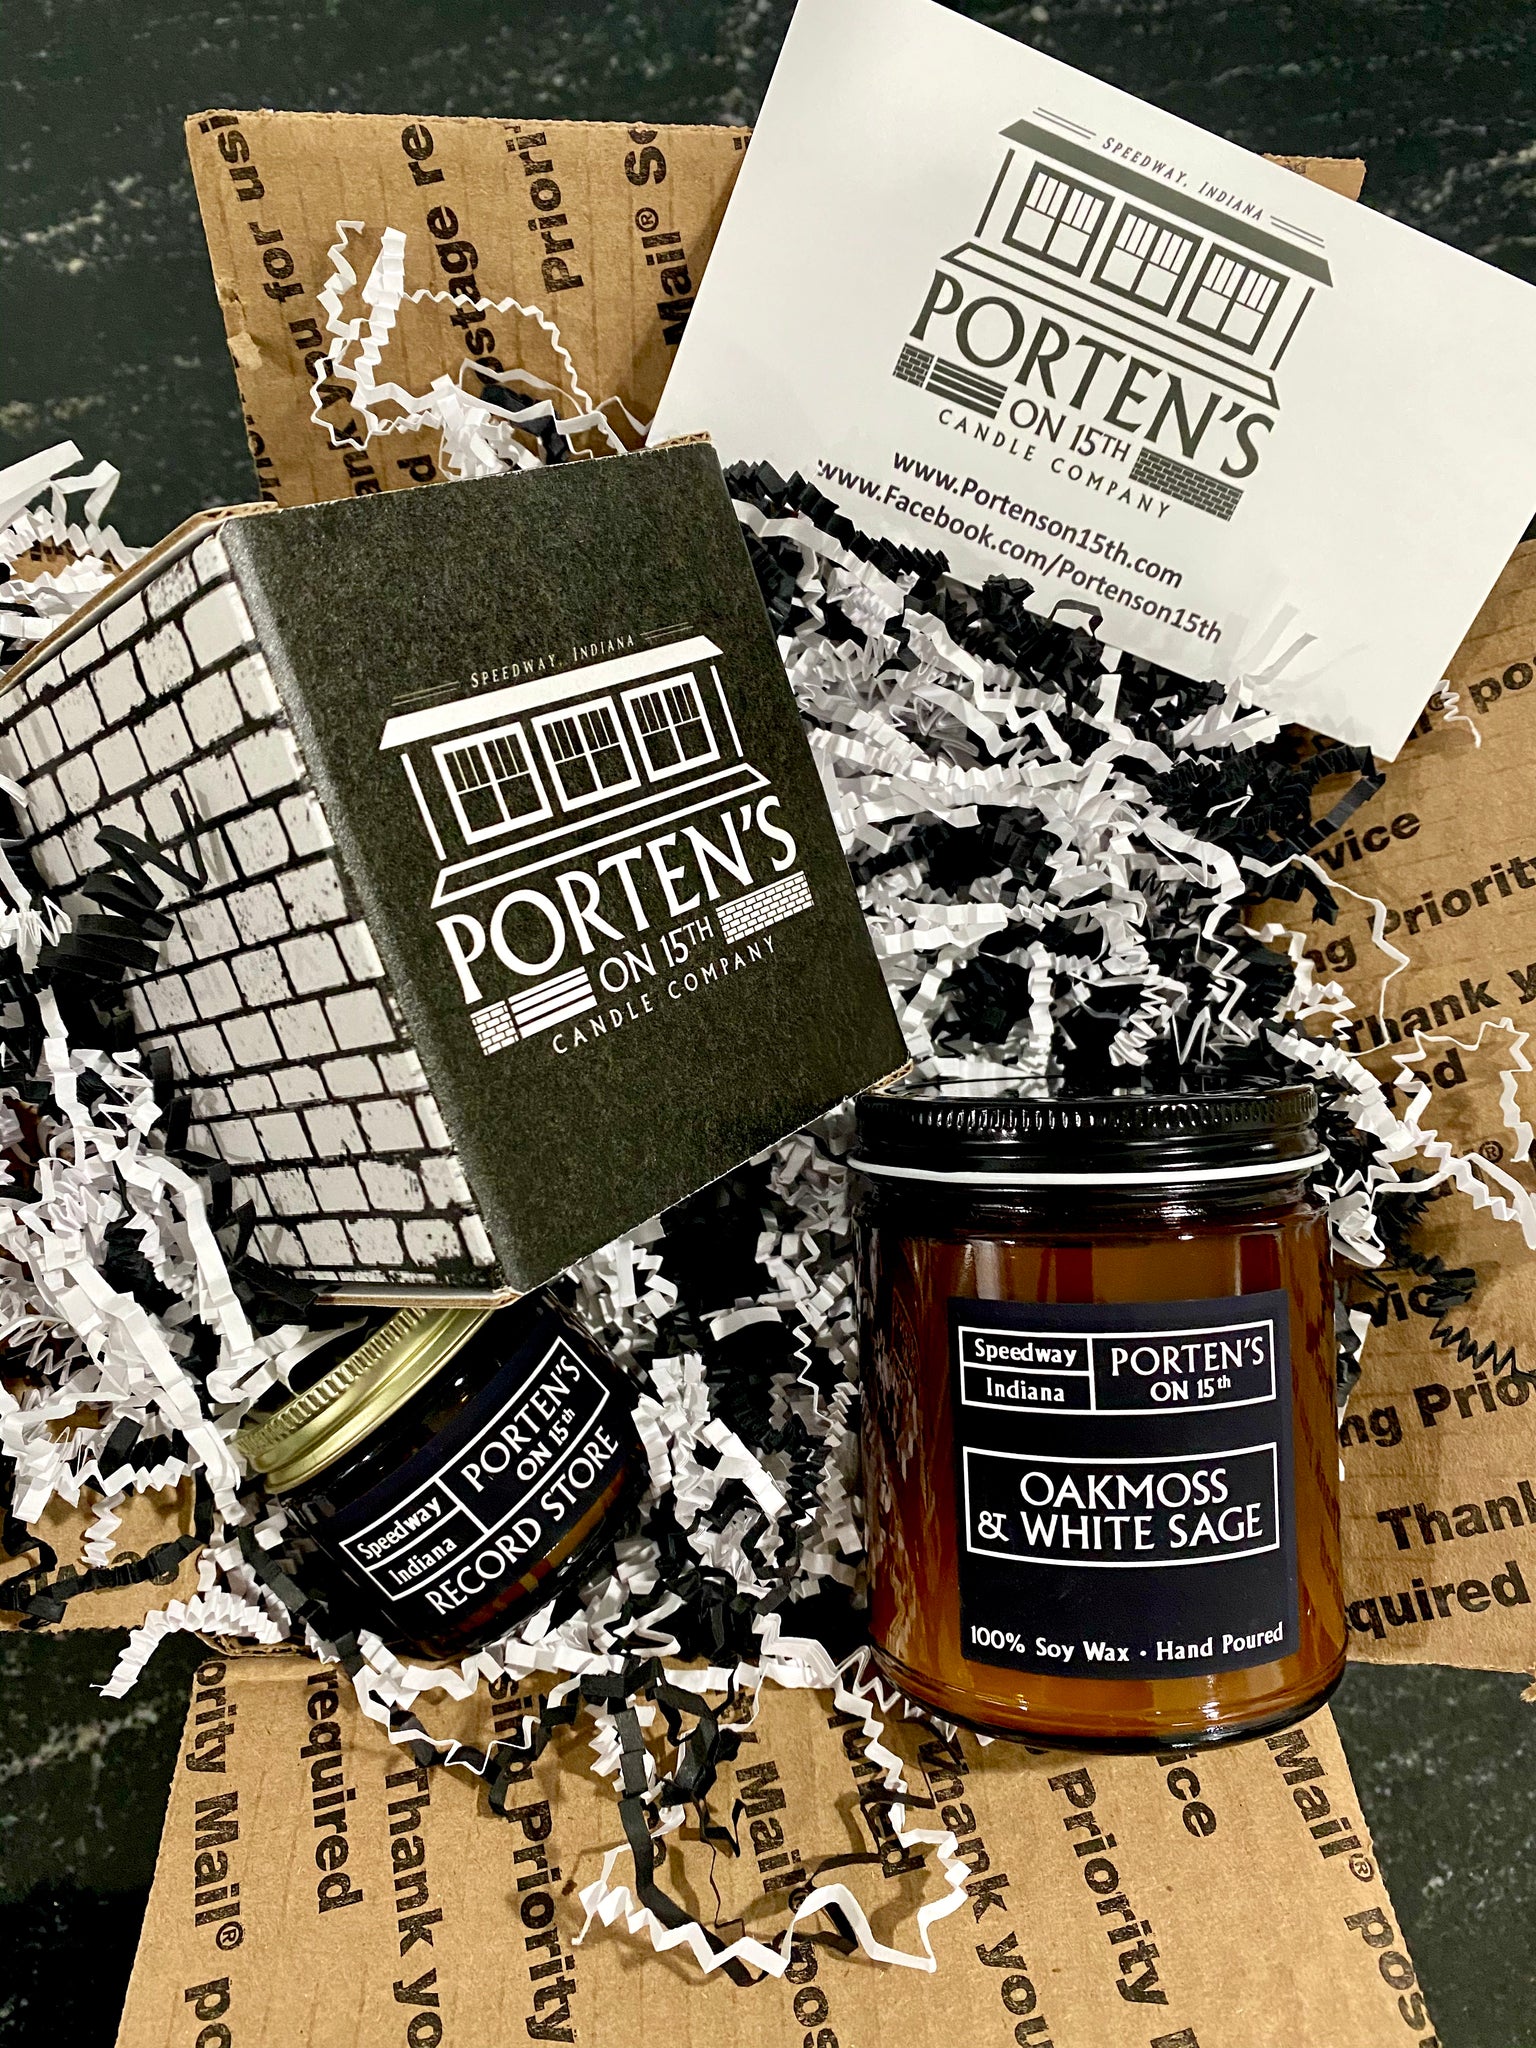 Porten's on 15th candles make great gifts.  Here's why: